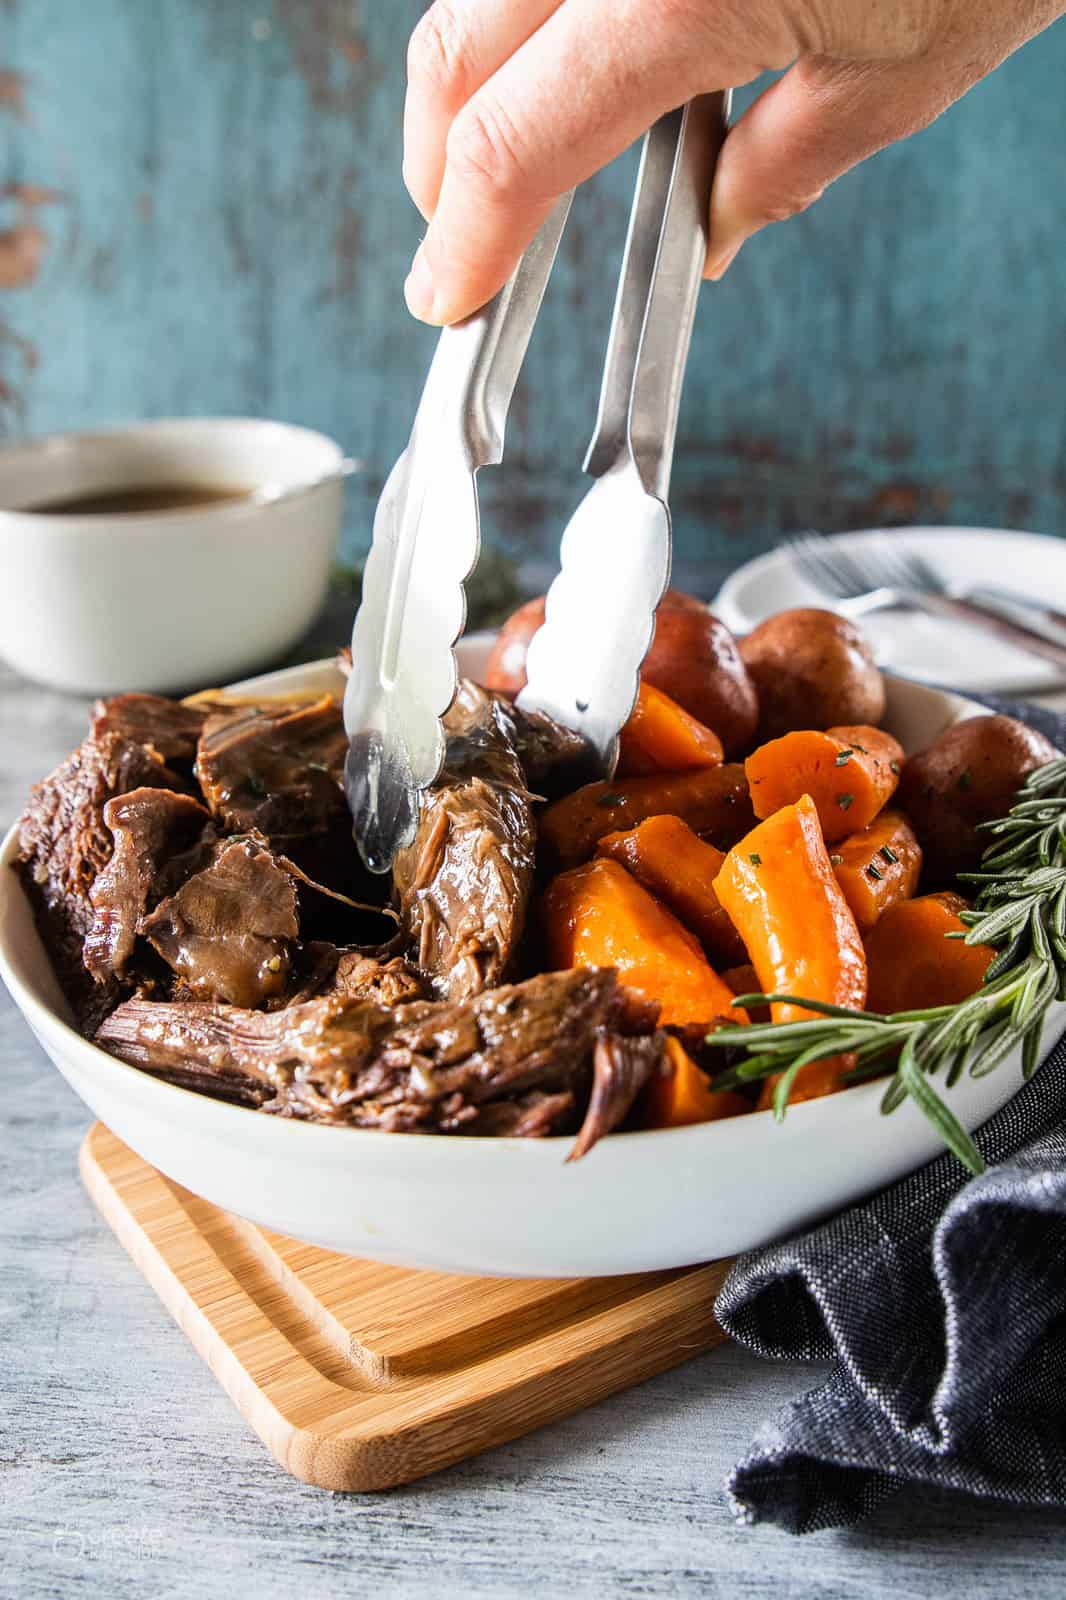 tongs picking up pot roast from serving bowl